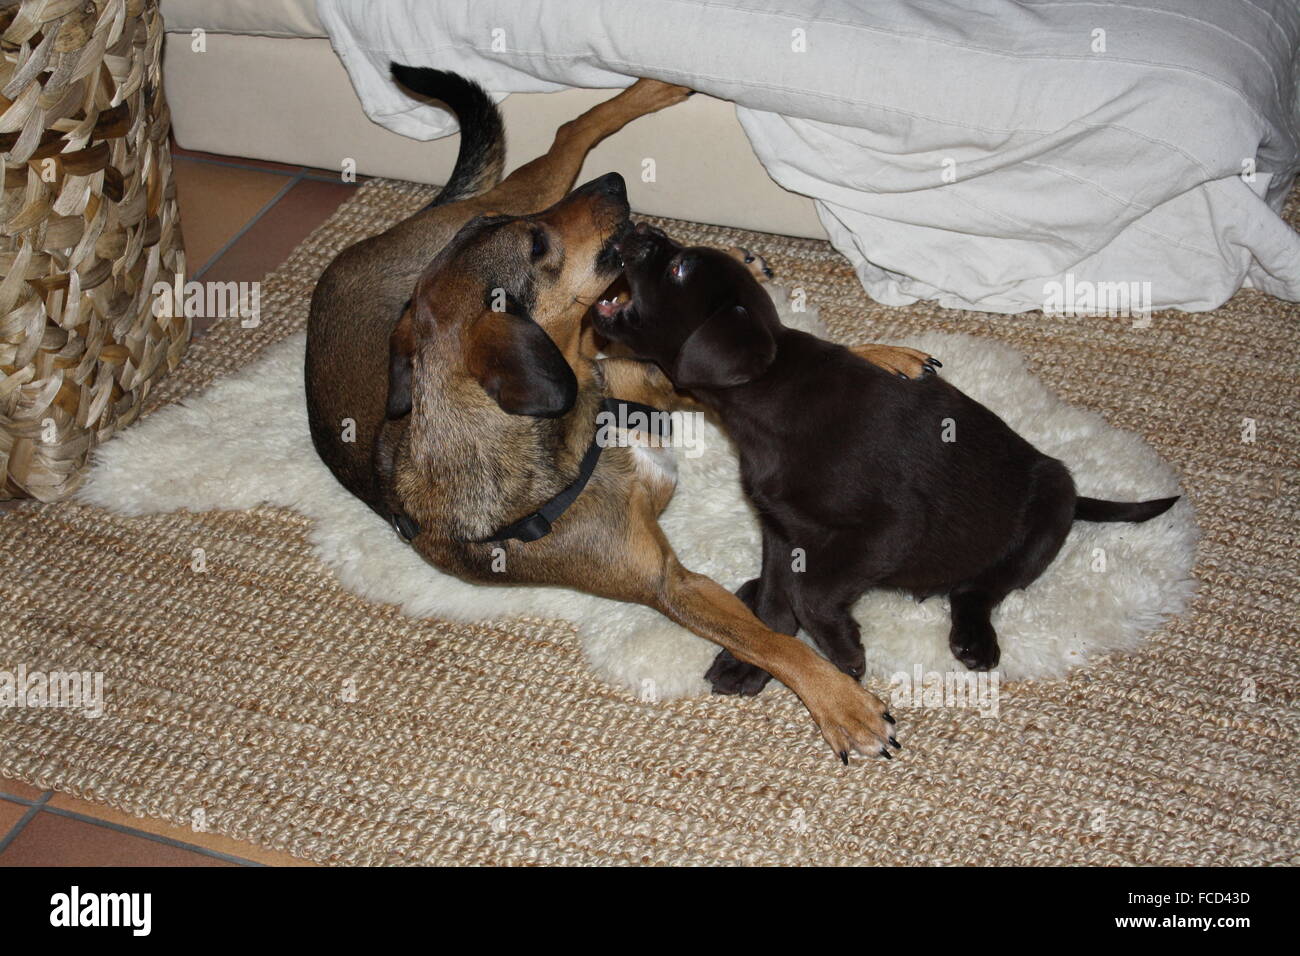 Funny Dogs Playing On The Floor Indoor Stock Photo